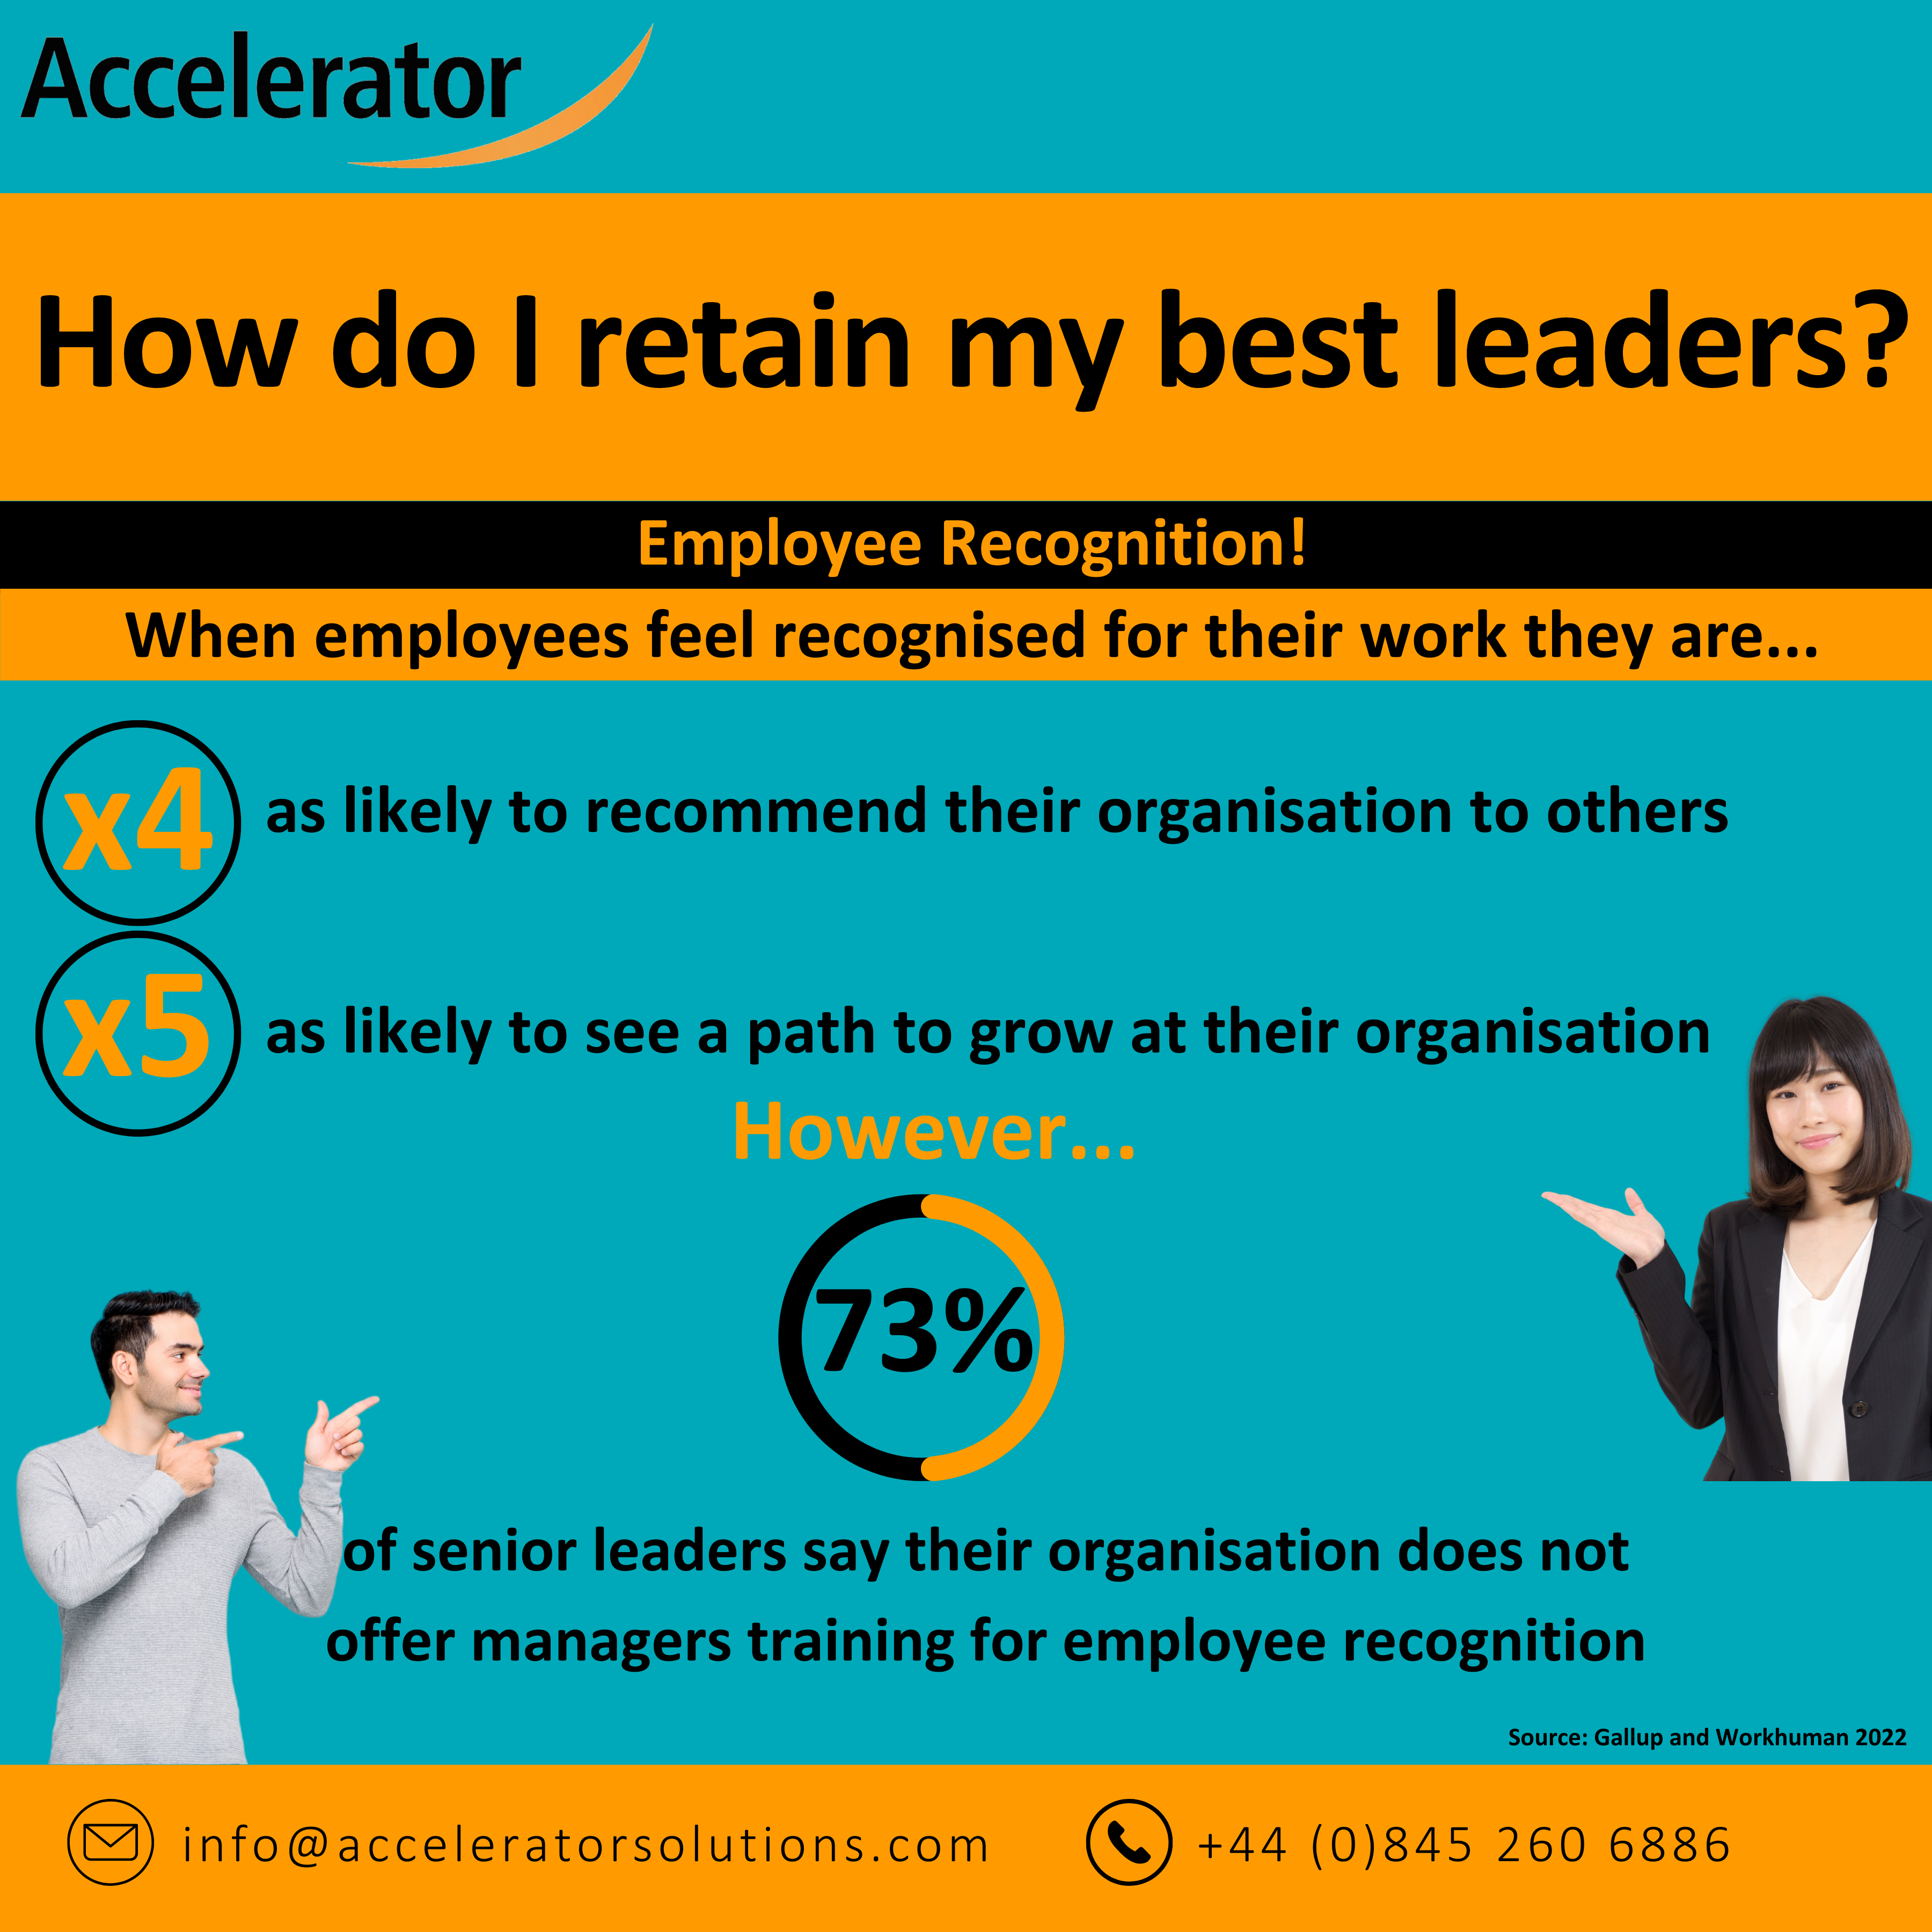 How do I retain my best leaders?